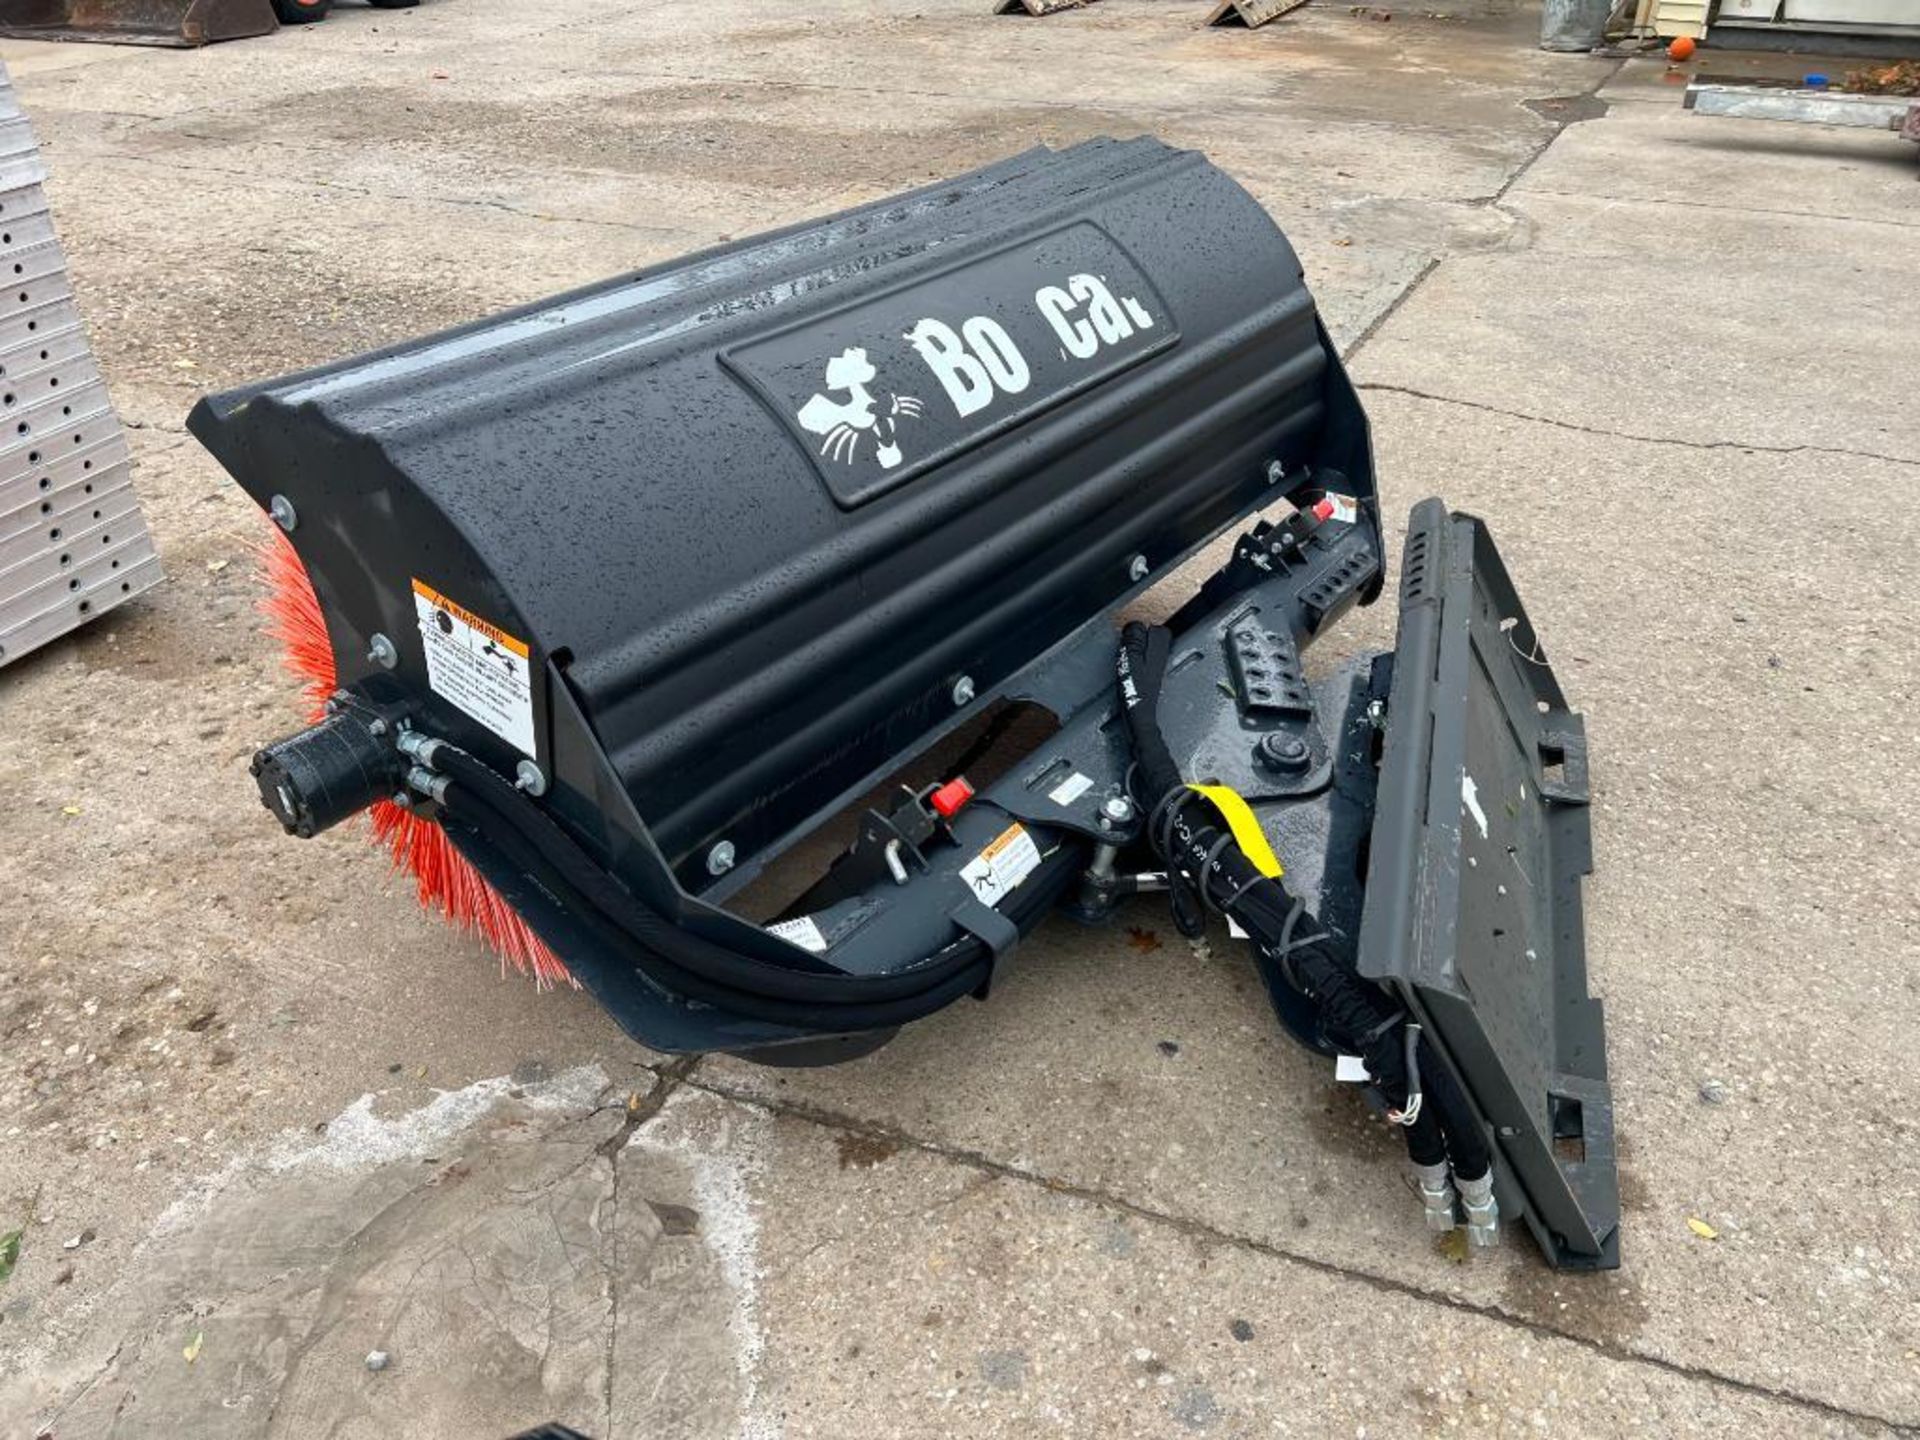 2019 Bobcat Angle Broom Attachment, Model #68, Serial #B4KZ00627, Hydraulically Driven Angle Broom, - Image 3 of 6